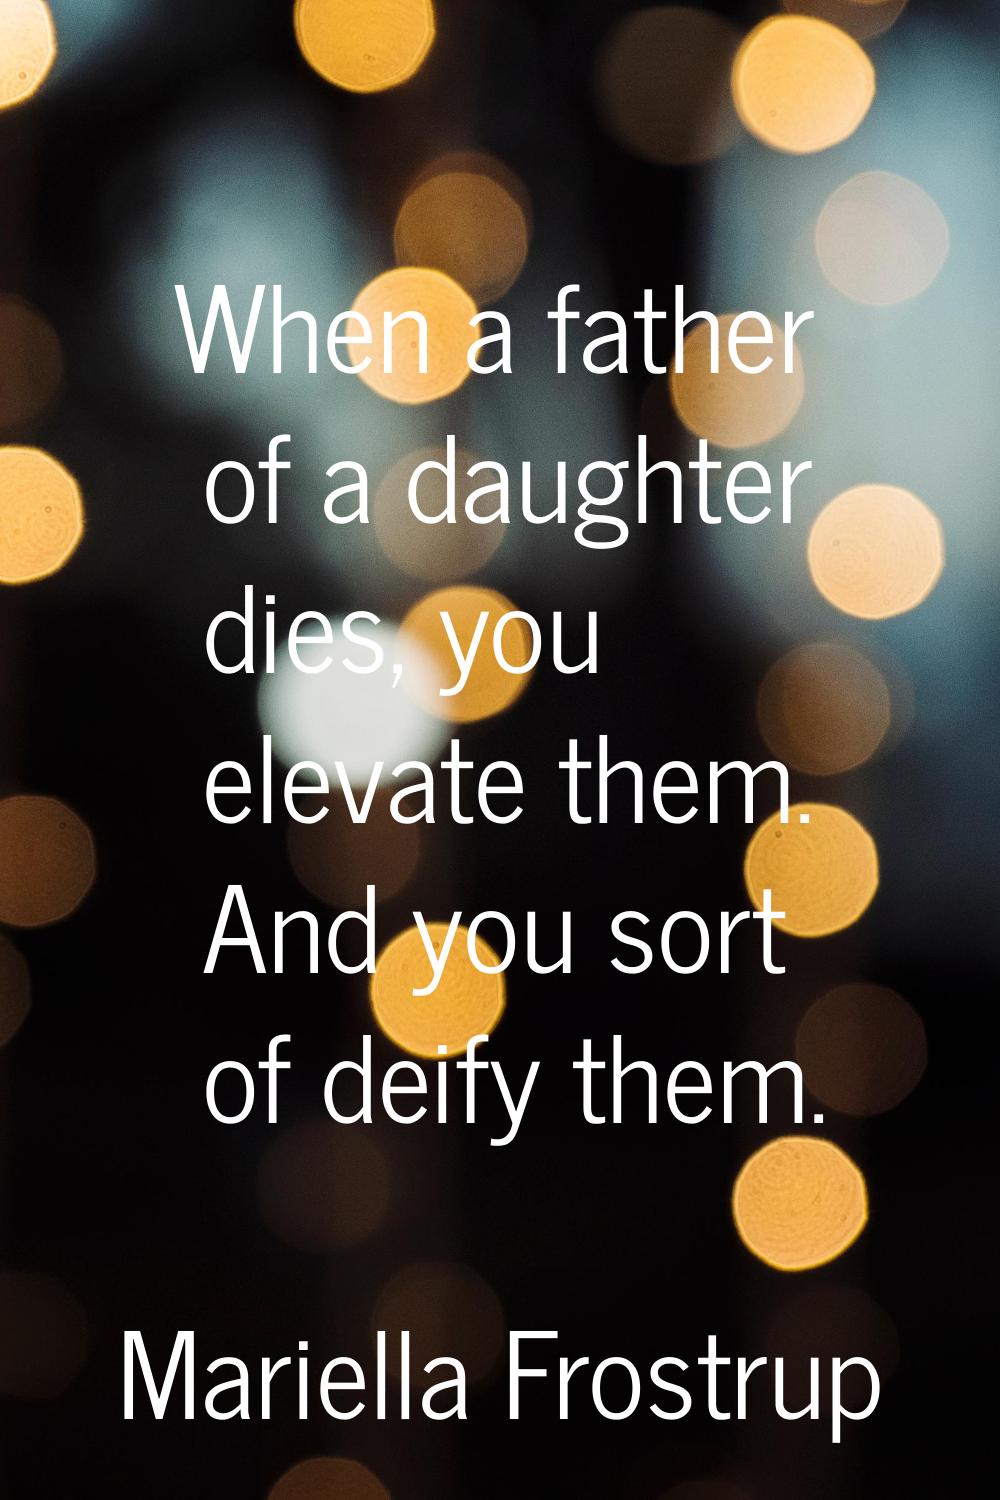 When a father of a daughter dies, you elevate them. And you sort of deify them.